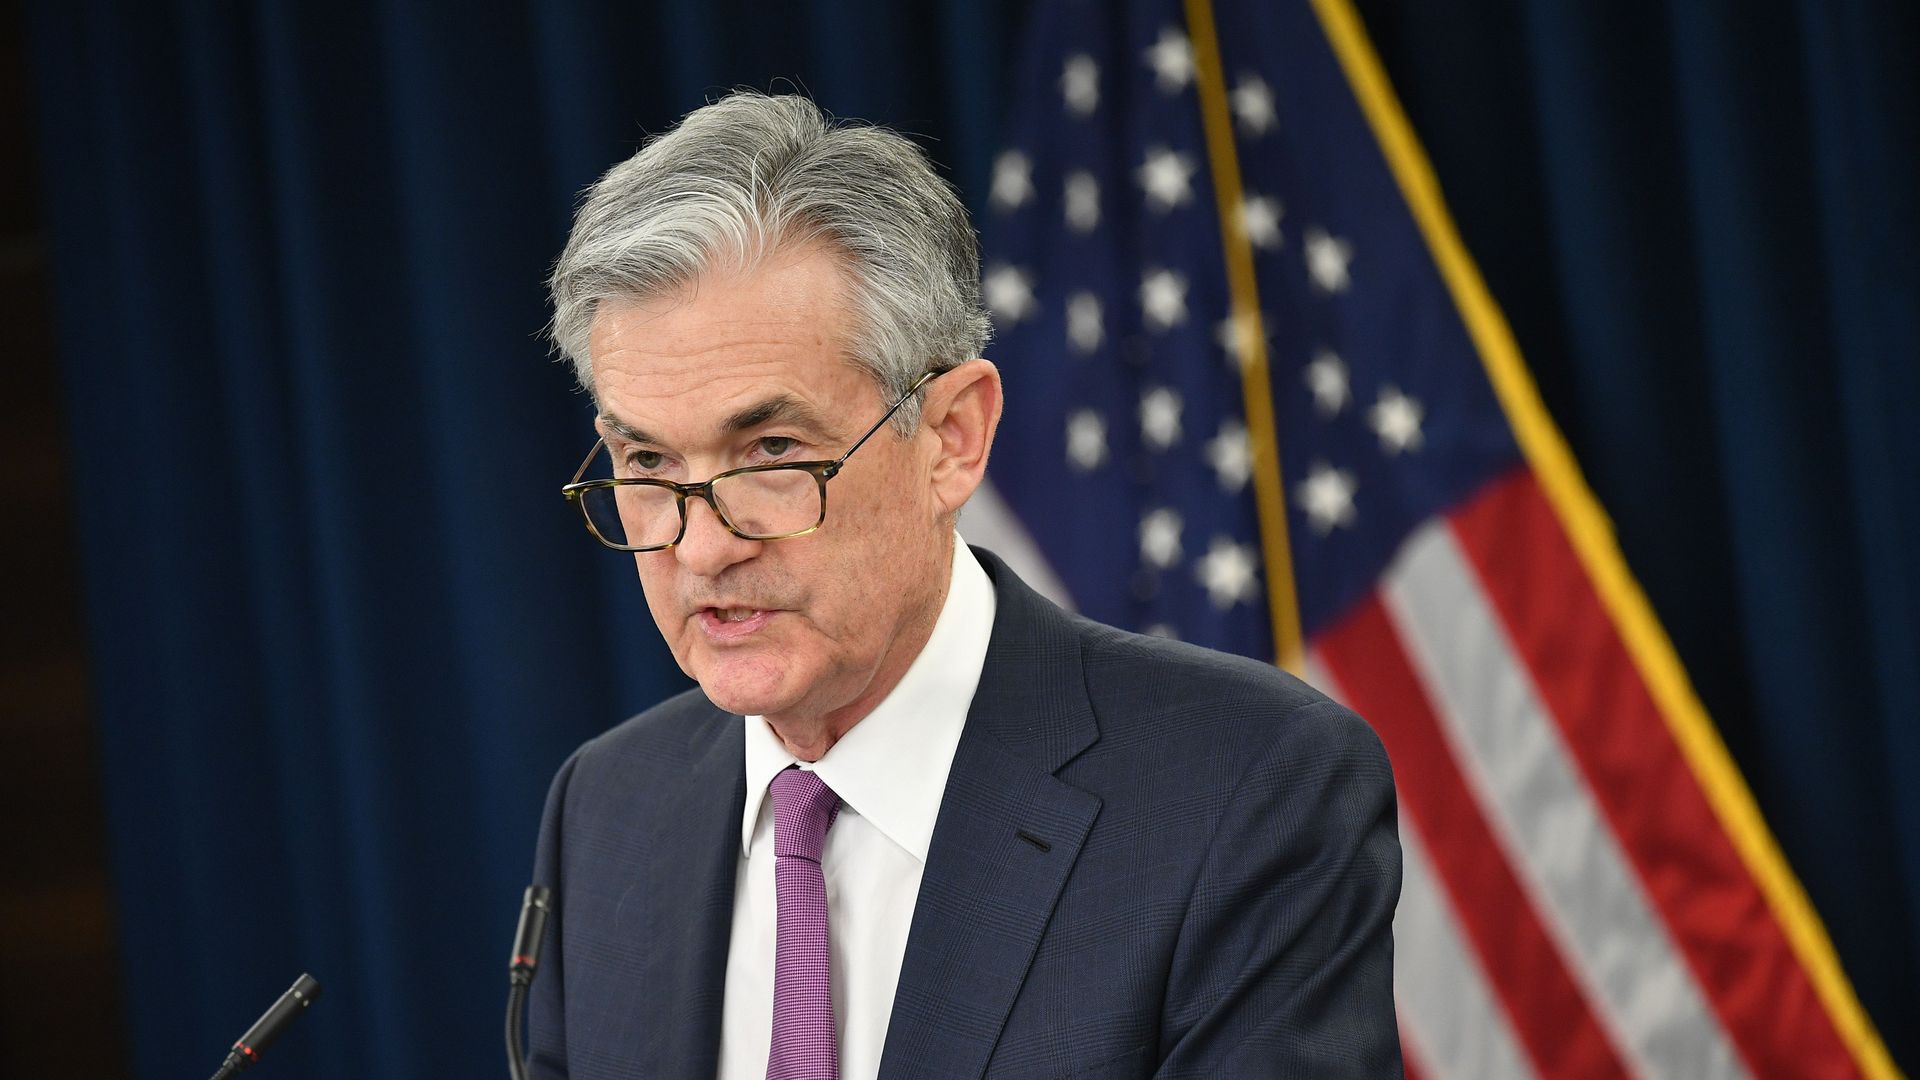 Federal Reserve Board Chair Jerome Powell speaks during a press conference 